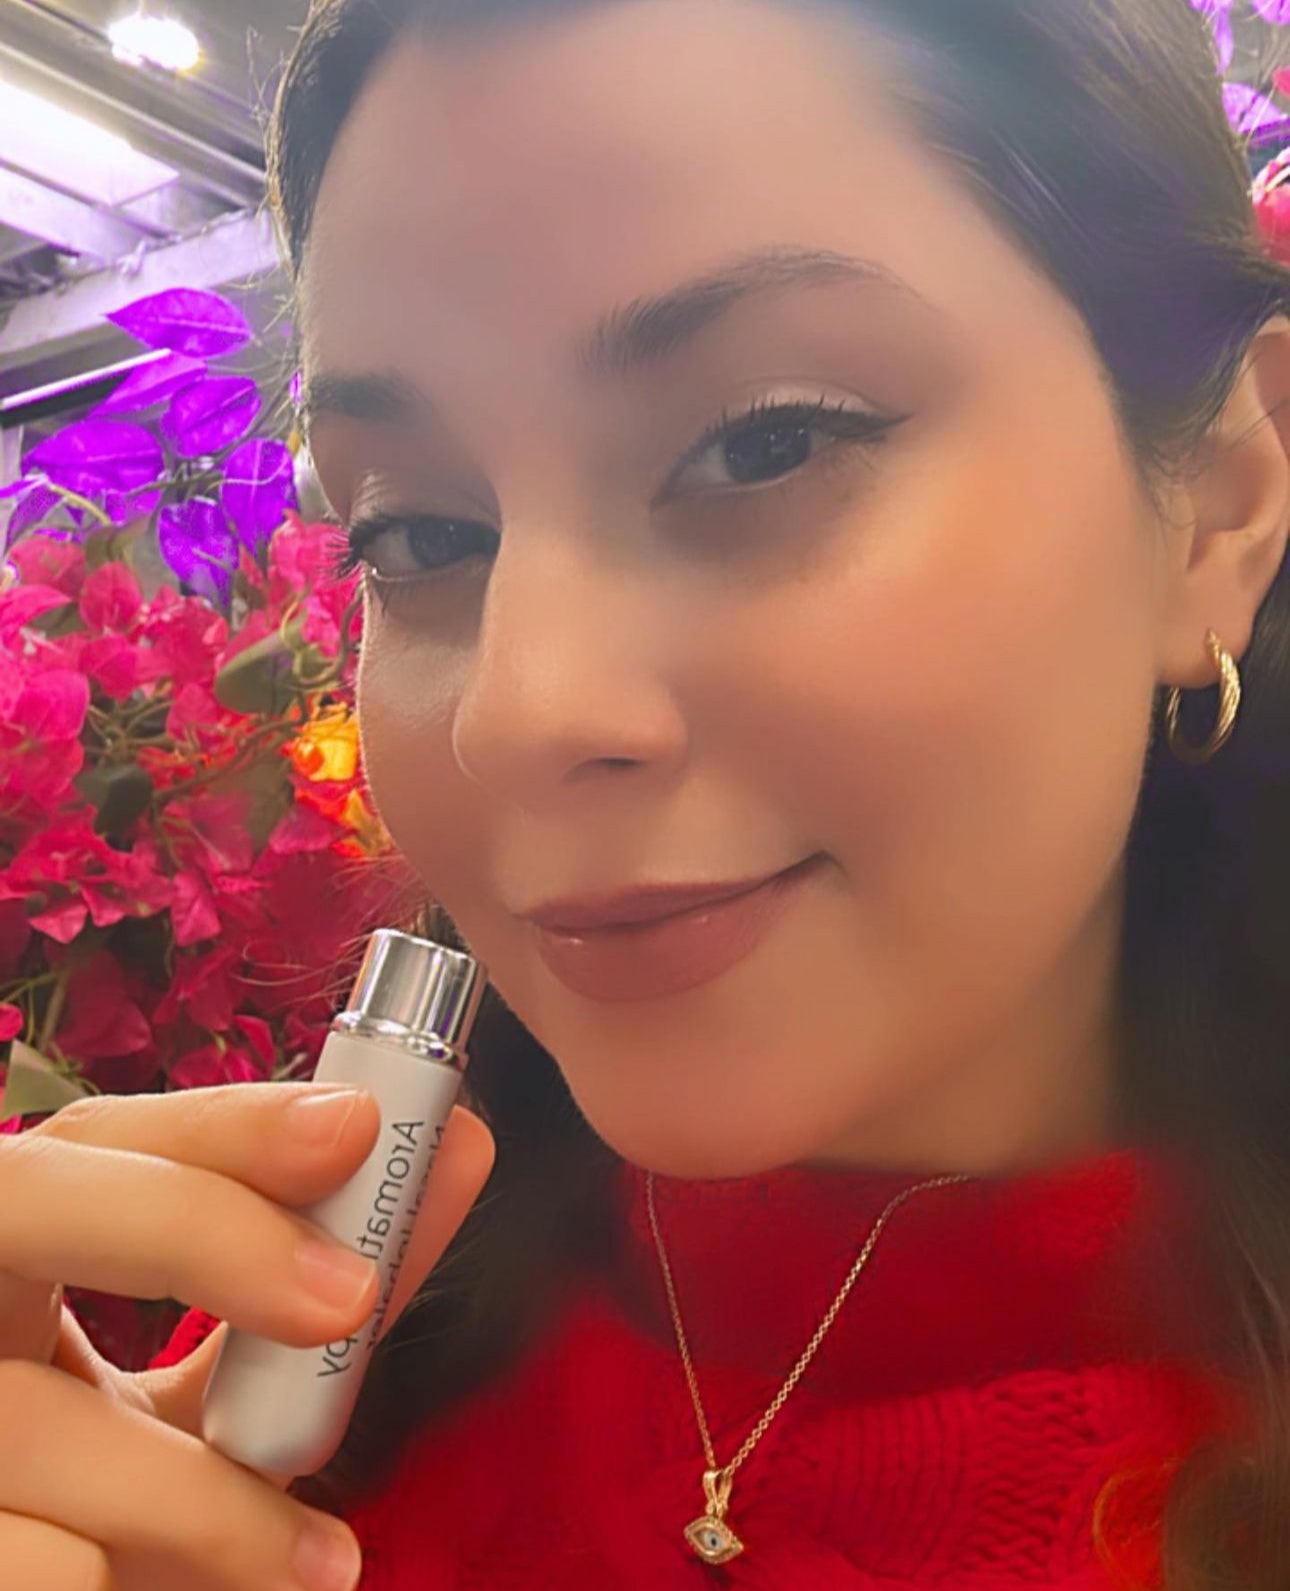 A woman in a red sweater using the aromatherapy inhaler